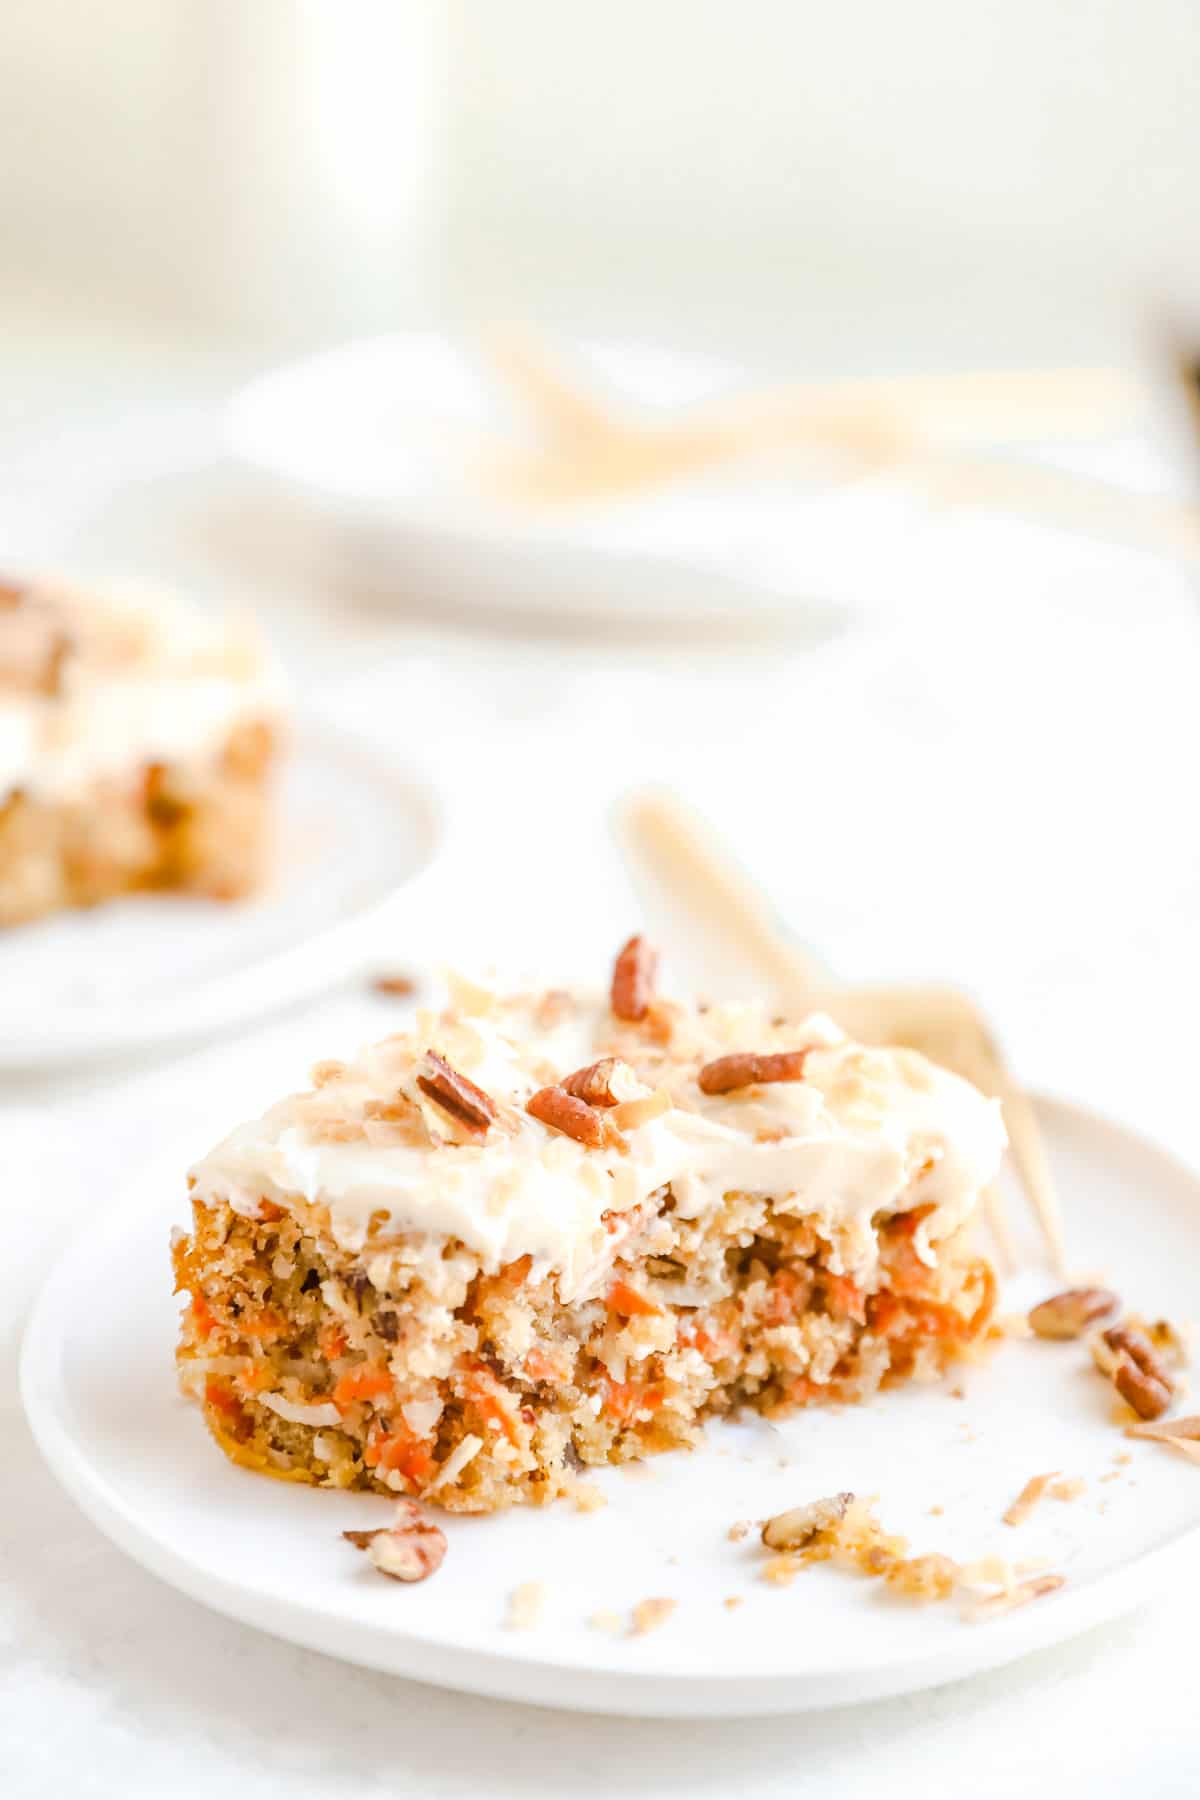 a square of old-fashioned carrot cake on a plate with whipped cream cheese frosting on top.